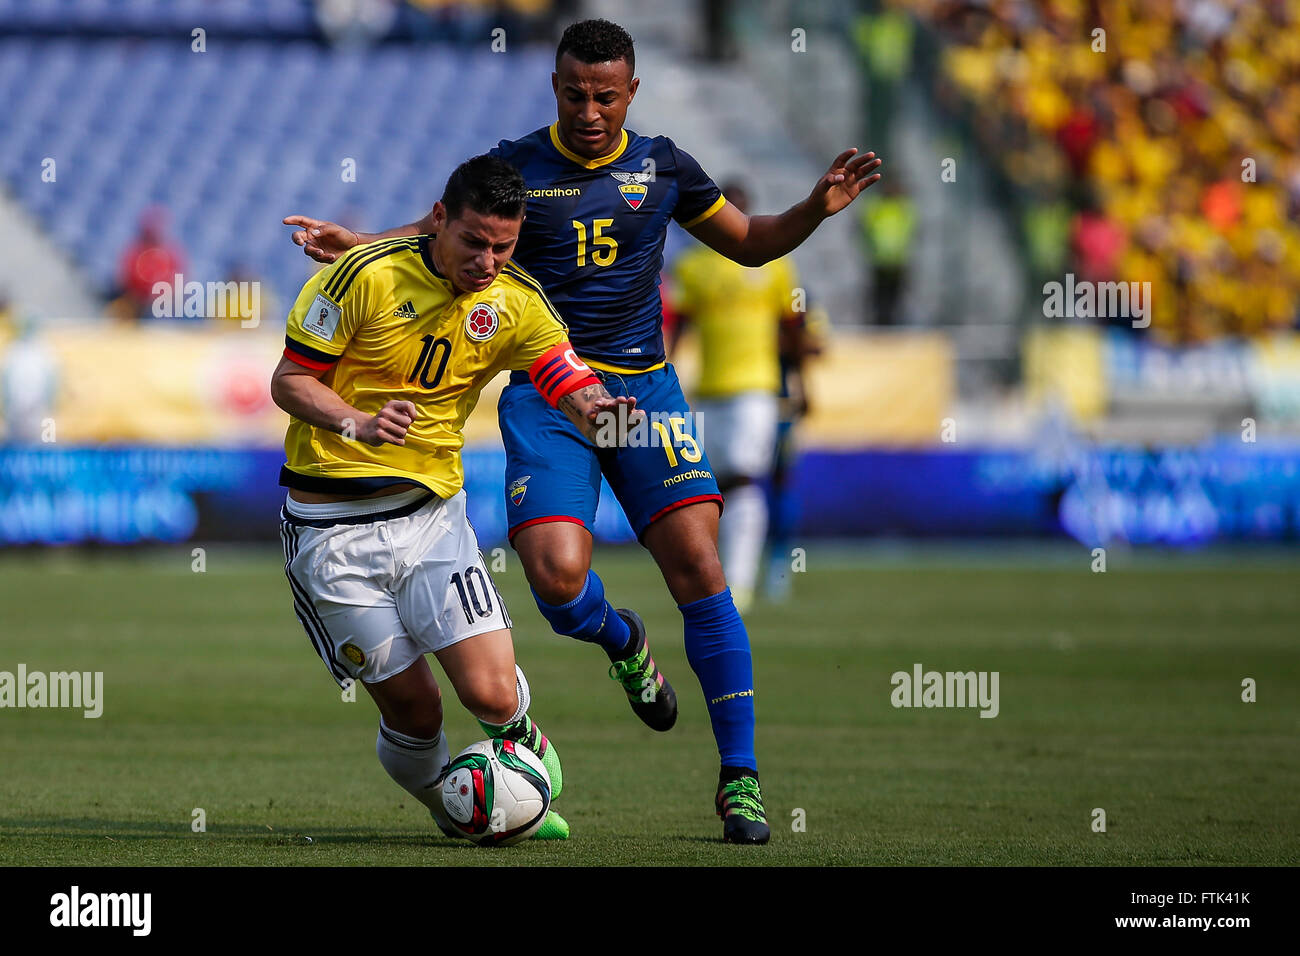 Barranquilla, Colombia. 29th Mar, 2016. Colombia's James Rodriguez (L) vies with Ecuador's Pedro Quinonez during their qualifying match for 2018 Russia World Cup at Metropolitano Roberto Melendez Stadium in Barranquilla, Colombia, on March 29, 2016. Colombia won 3-1. © Mauricio Alvarado/COLPRENSA/Xinhua/Alamy Live News Stock Photo